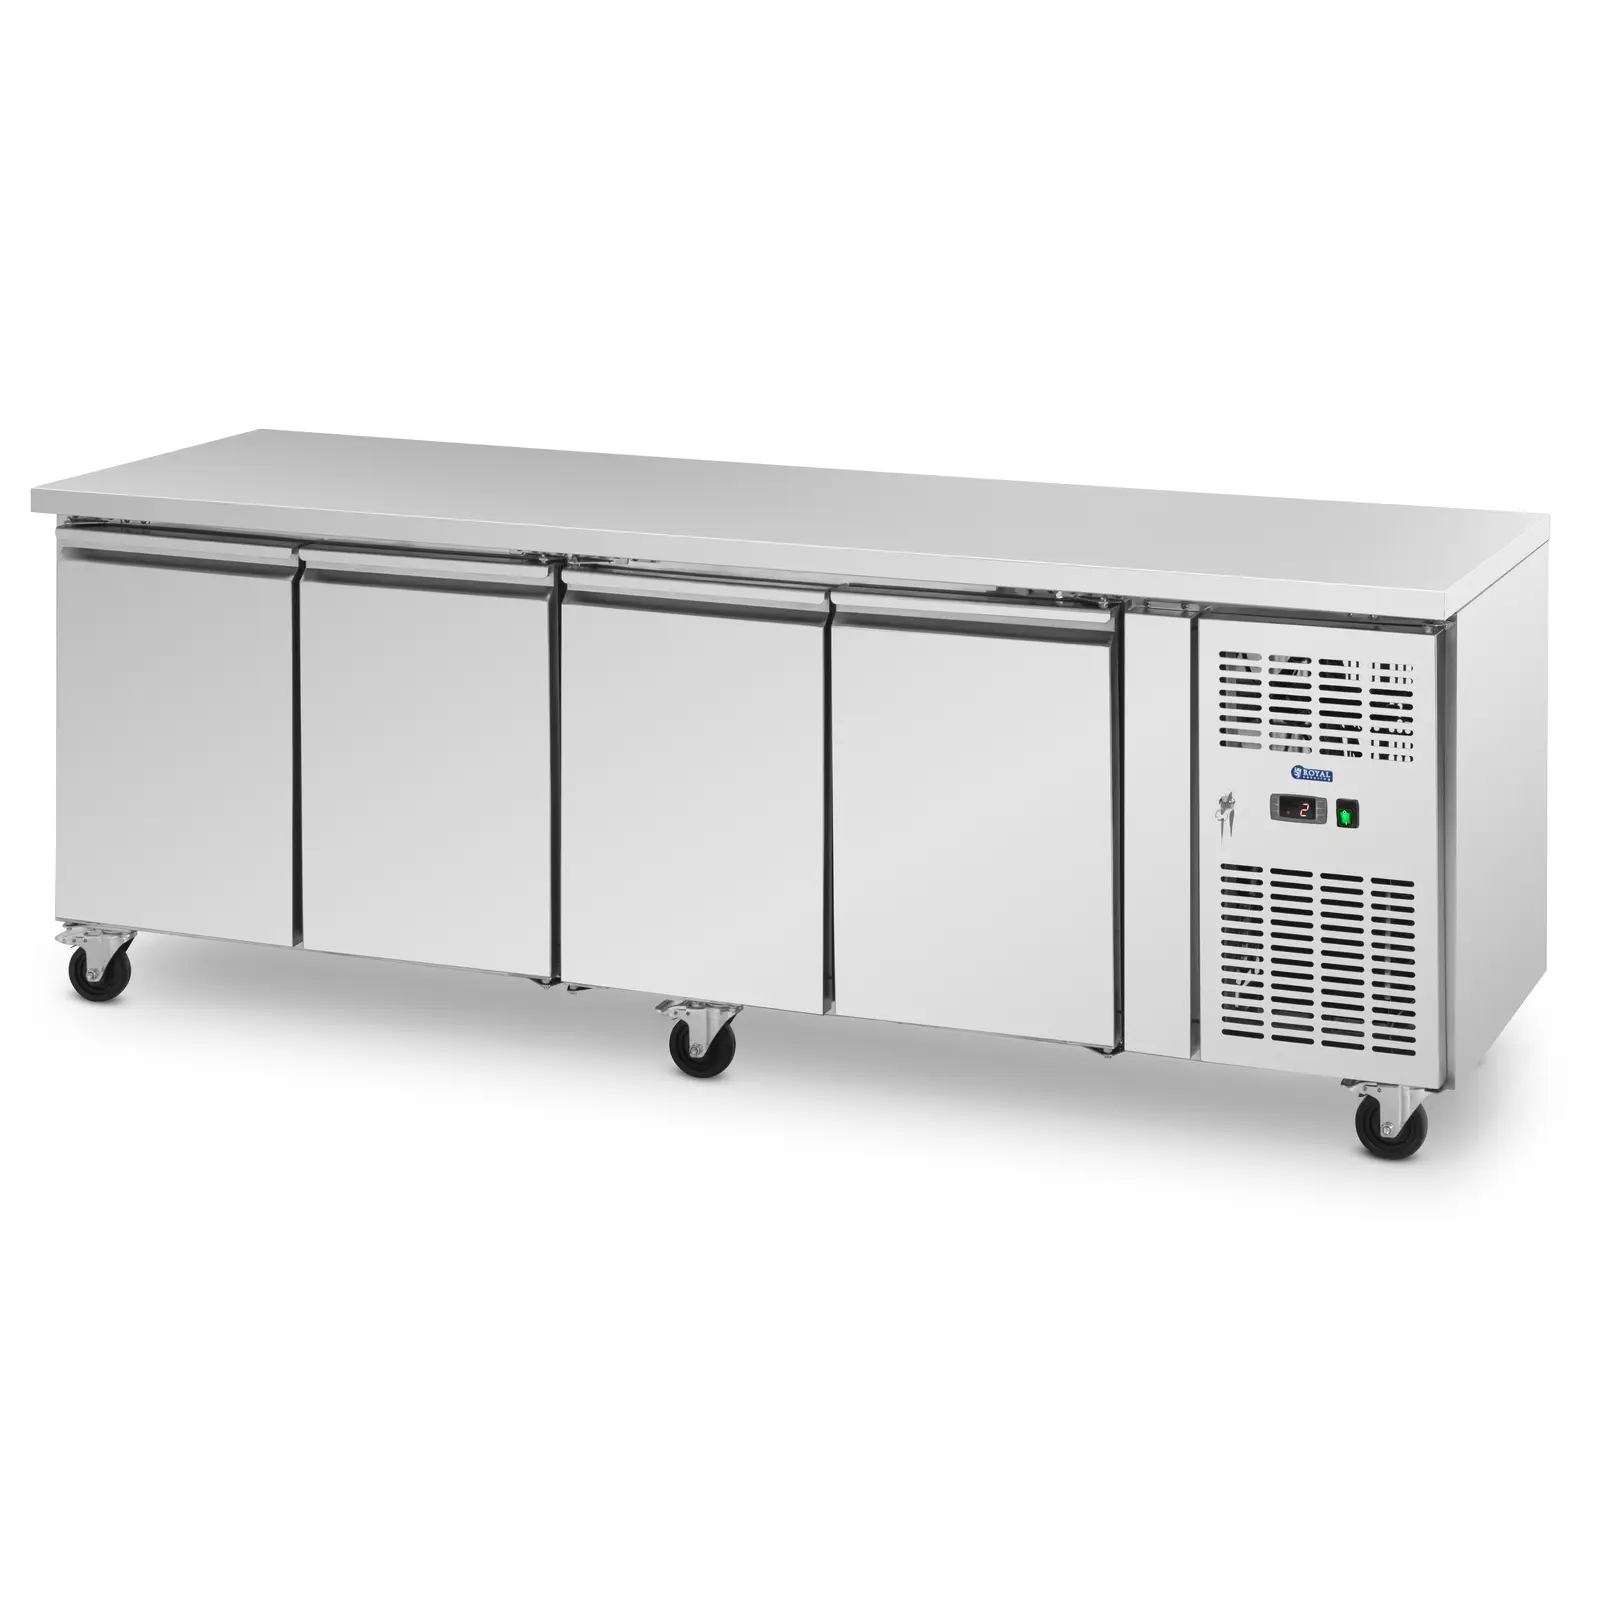 Mobile Saladette Fridge - 550 l - 4 compartments - 223 x 70 cm - class B - stainless steel - Royal Catering